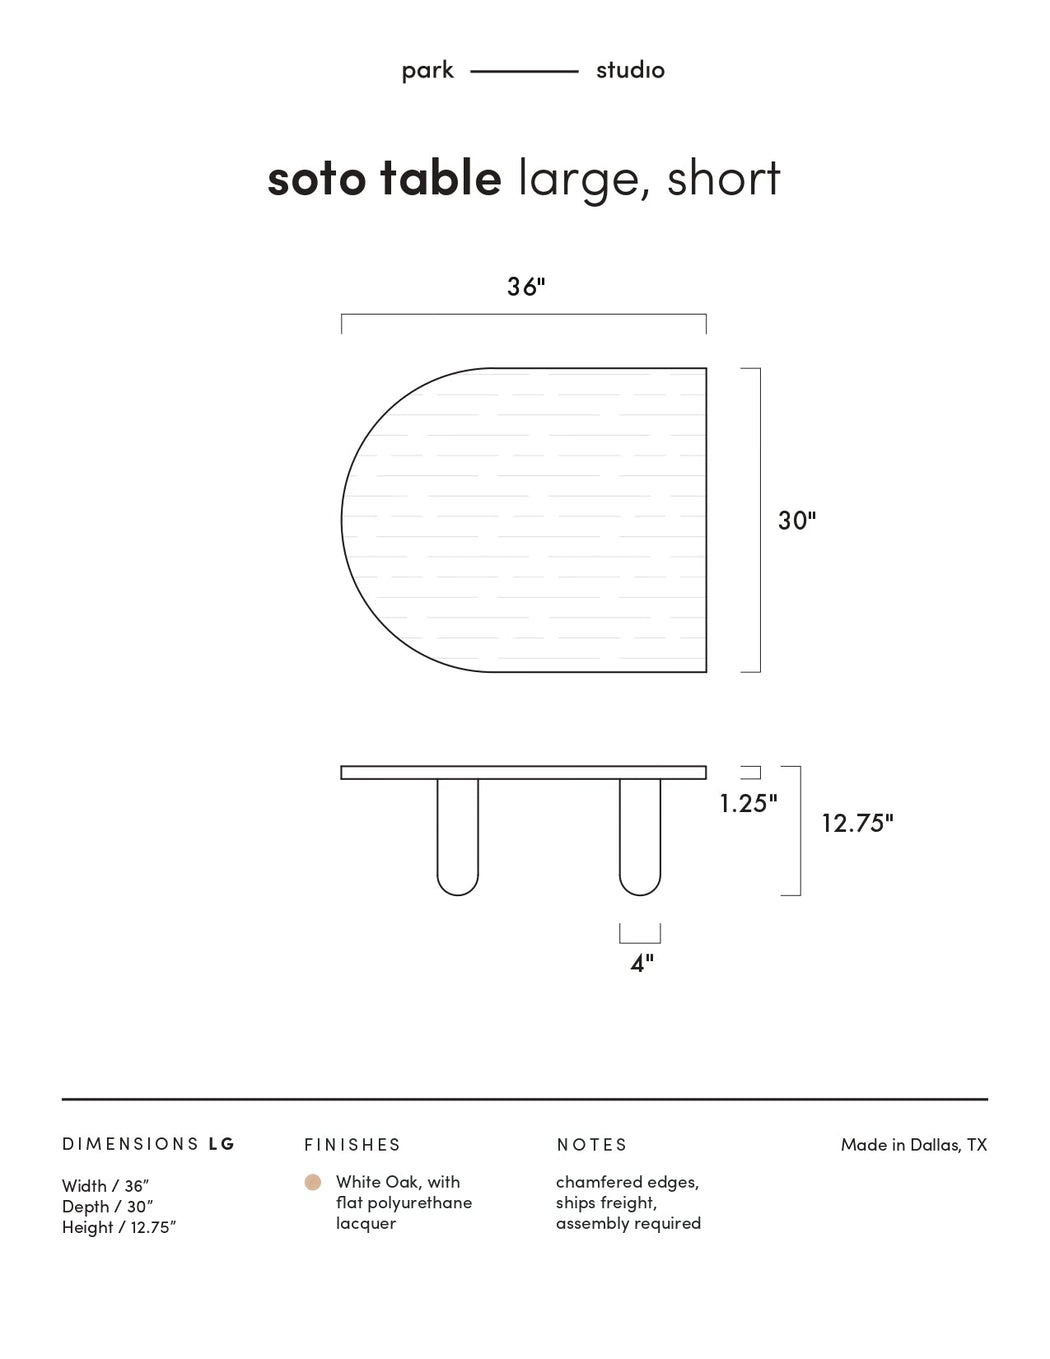 Seconds Soto Coffee Table